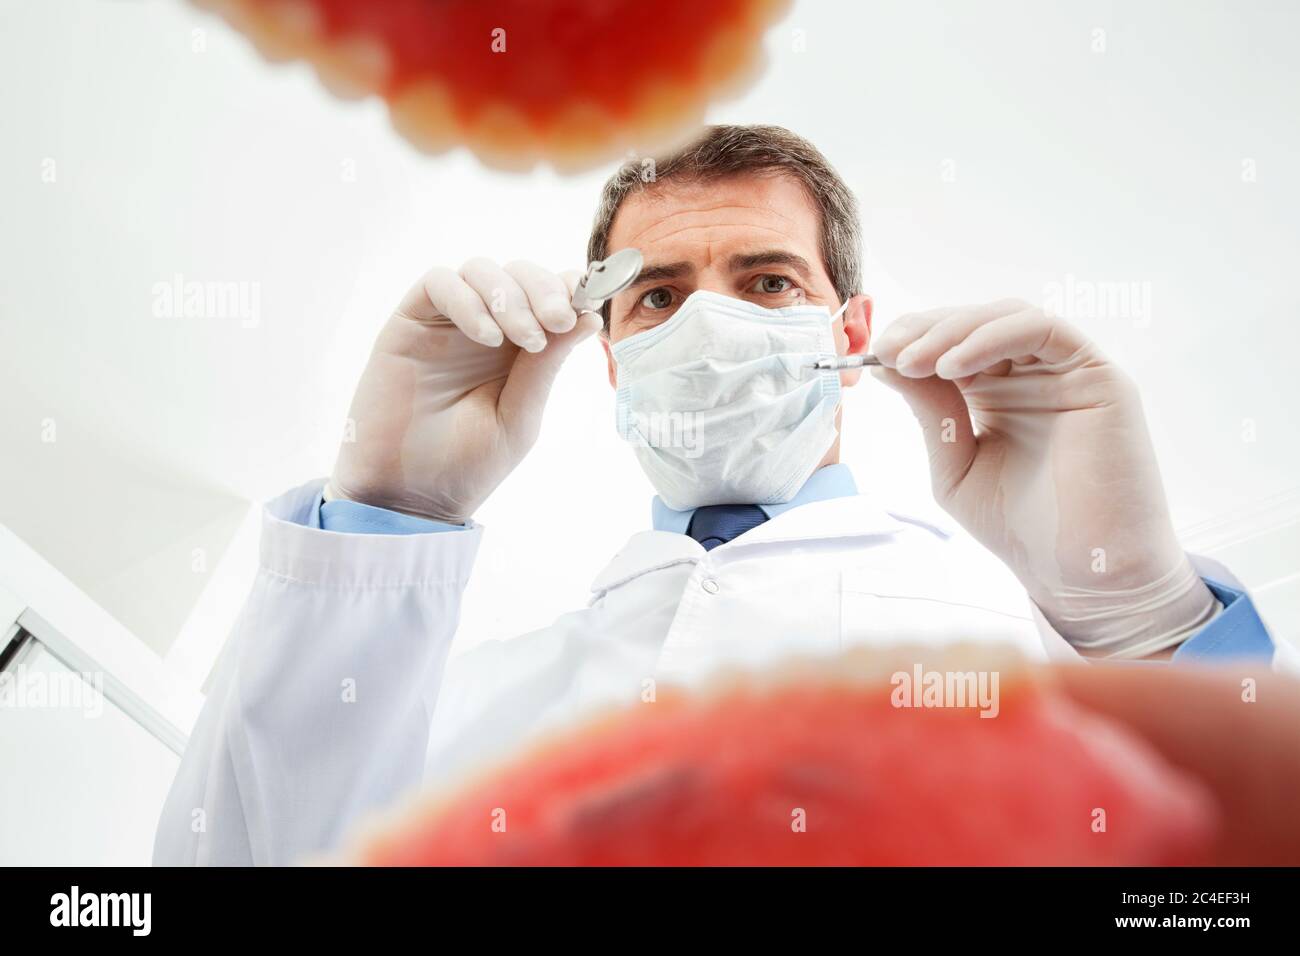 Dentist with face mask examines opened mouth Stock Photo